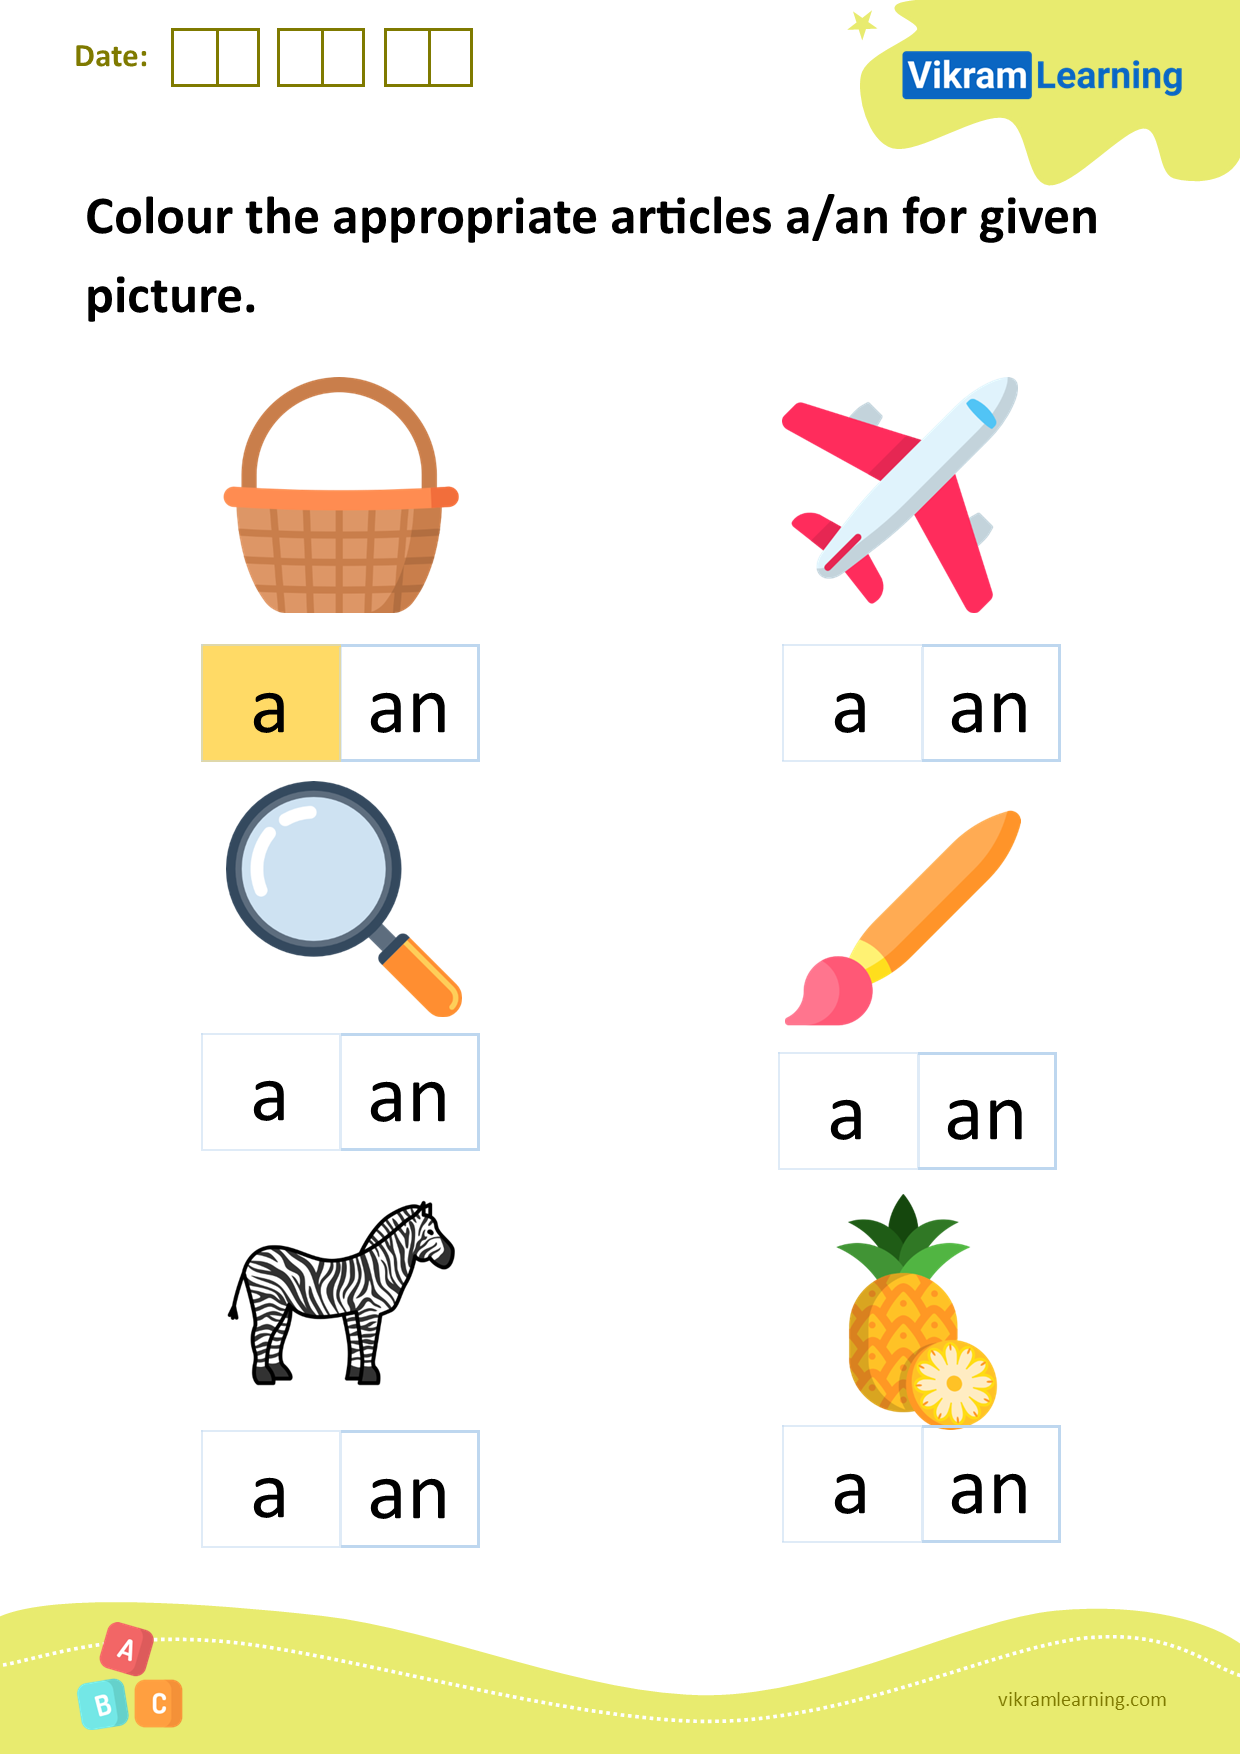 Download colour the appropriate articles a/an for given picture worksheets